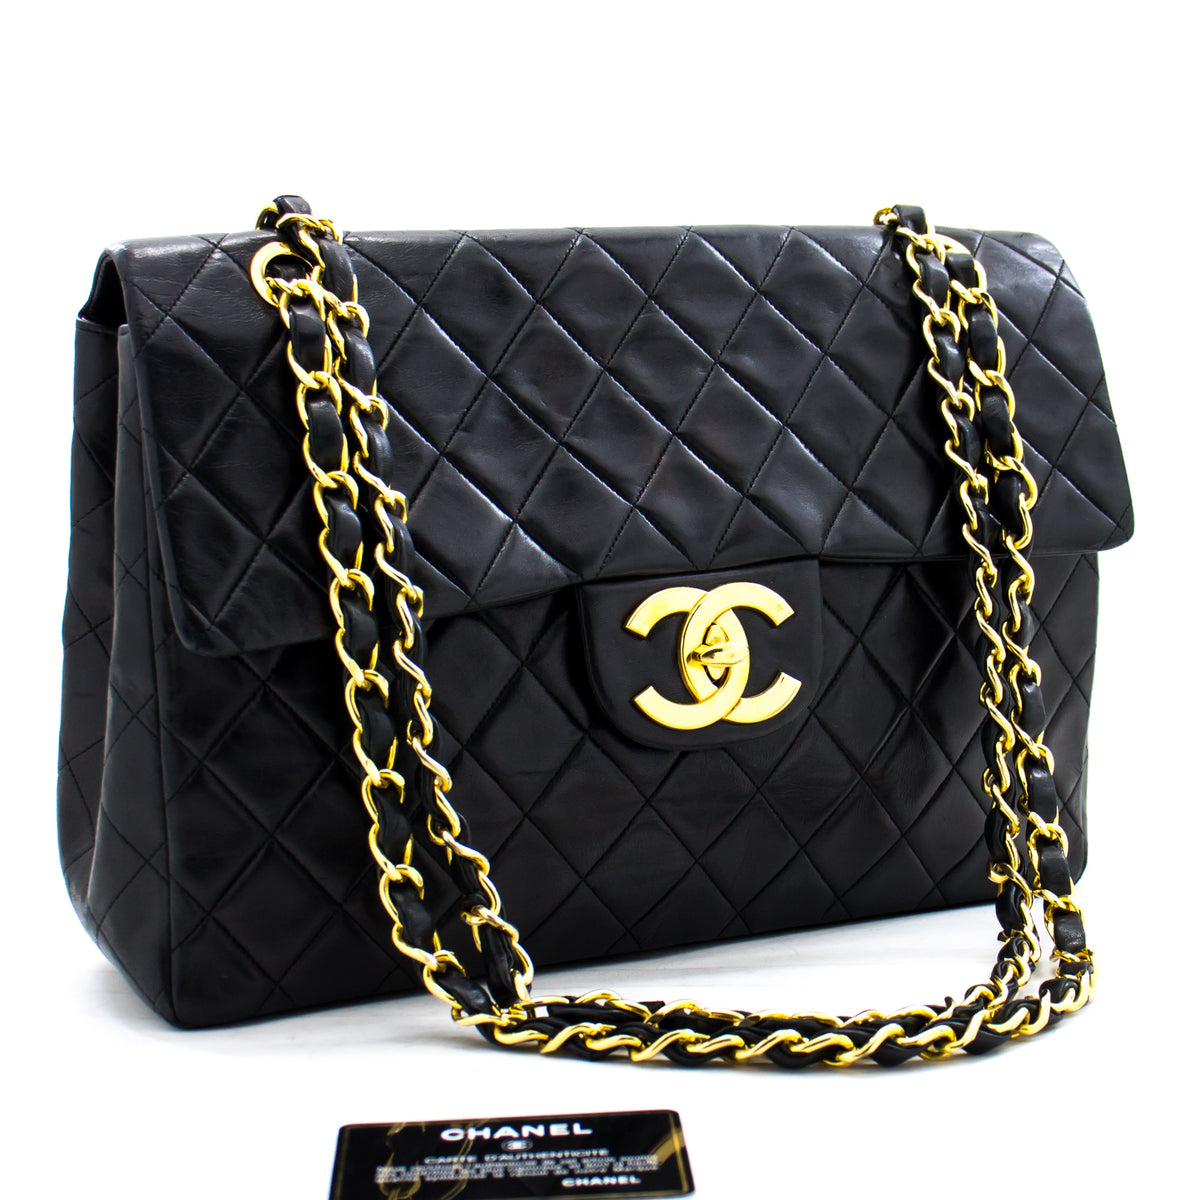 CHANEL 2.55 Leather Exterior Large Bags & Handbags for Women for sale